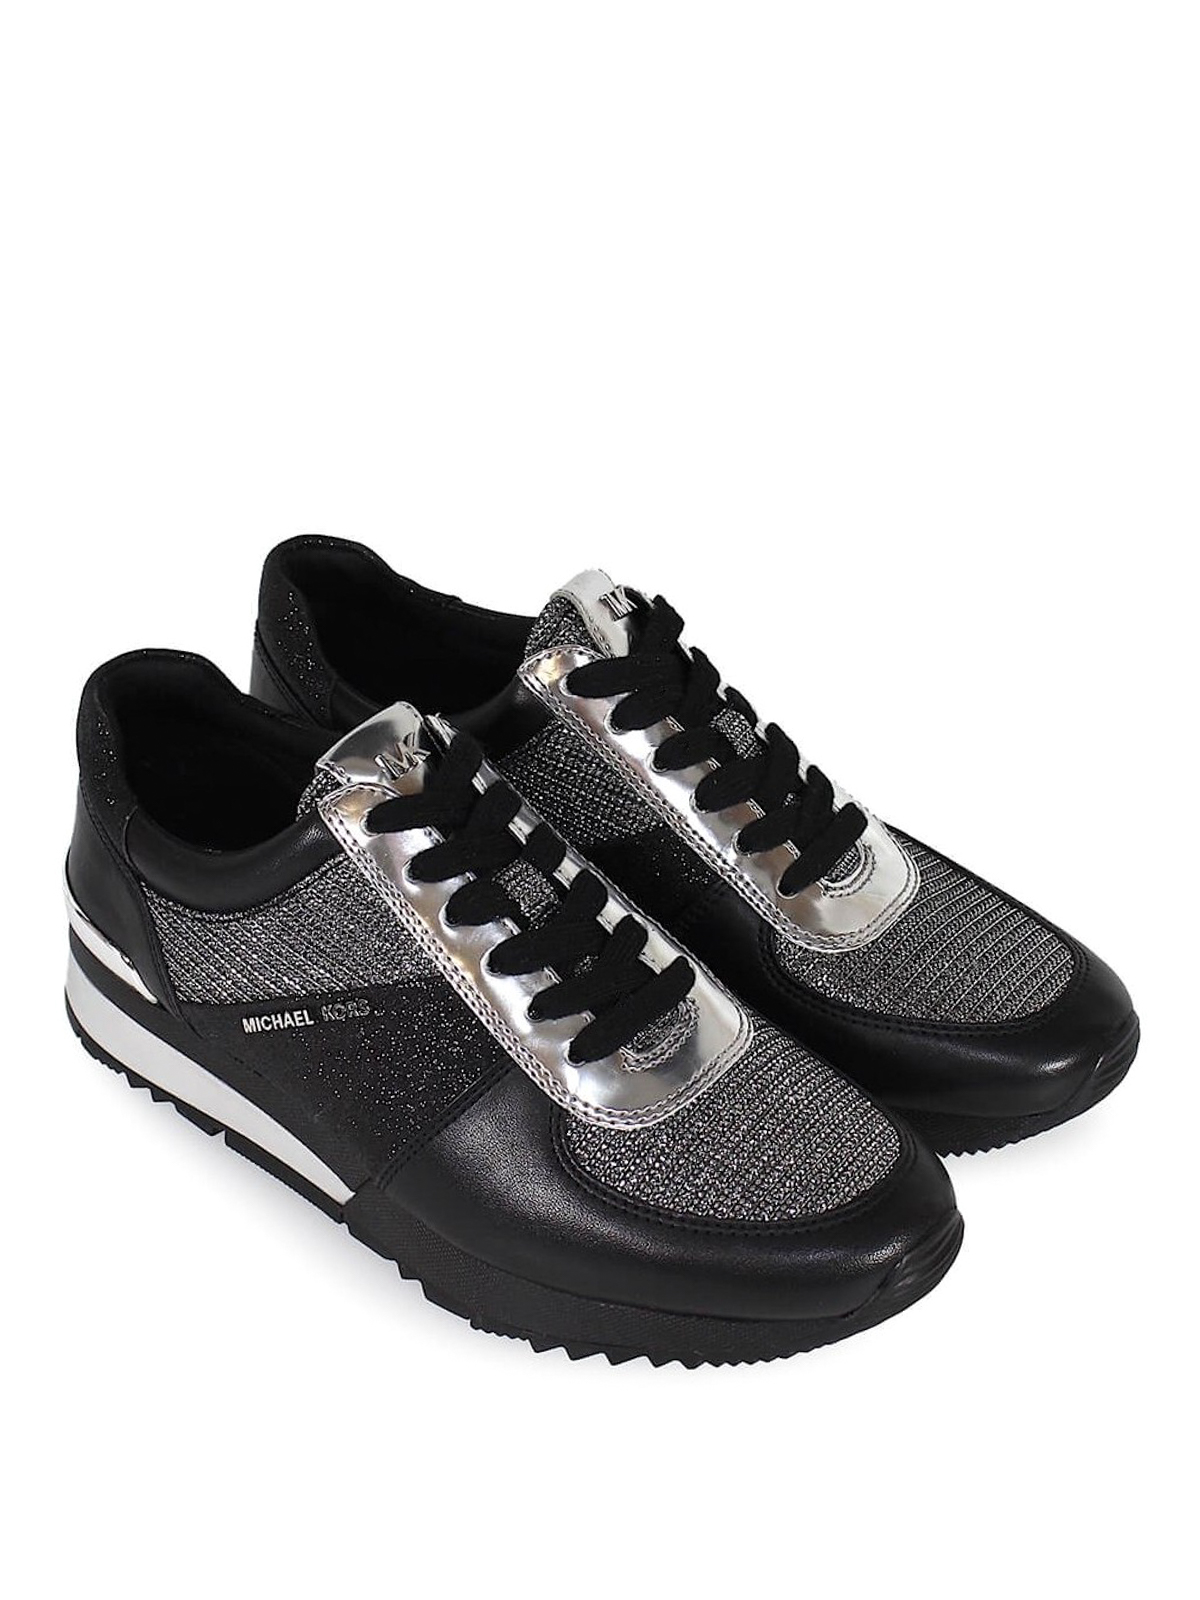 Trainers Michael Kors - Allie black leather and silver lurex - 43T8ALFS2D023